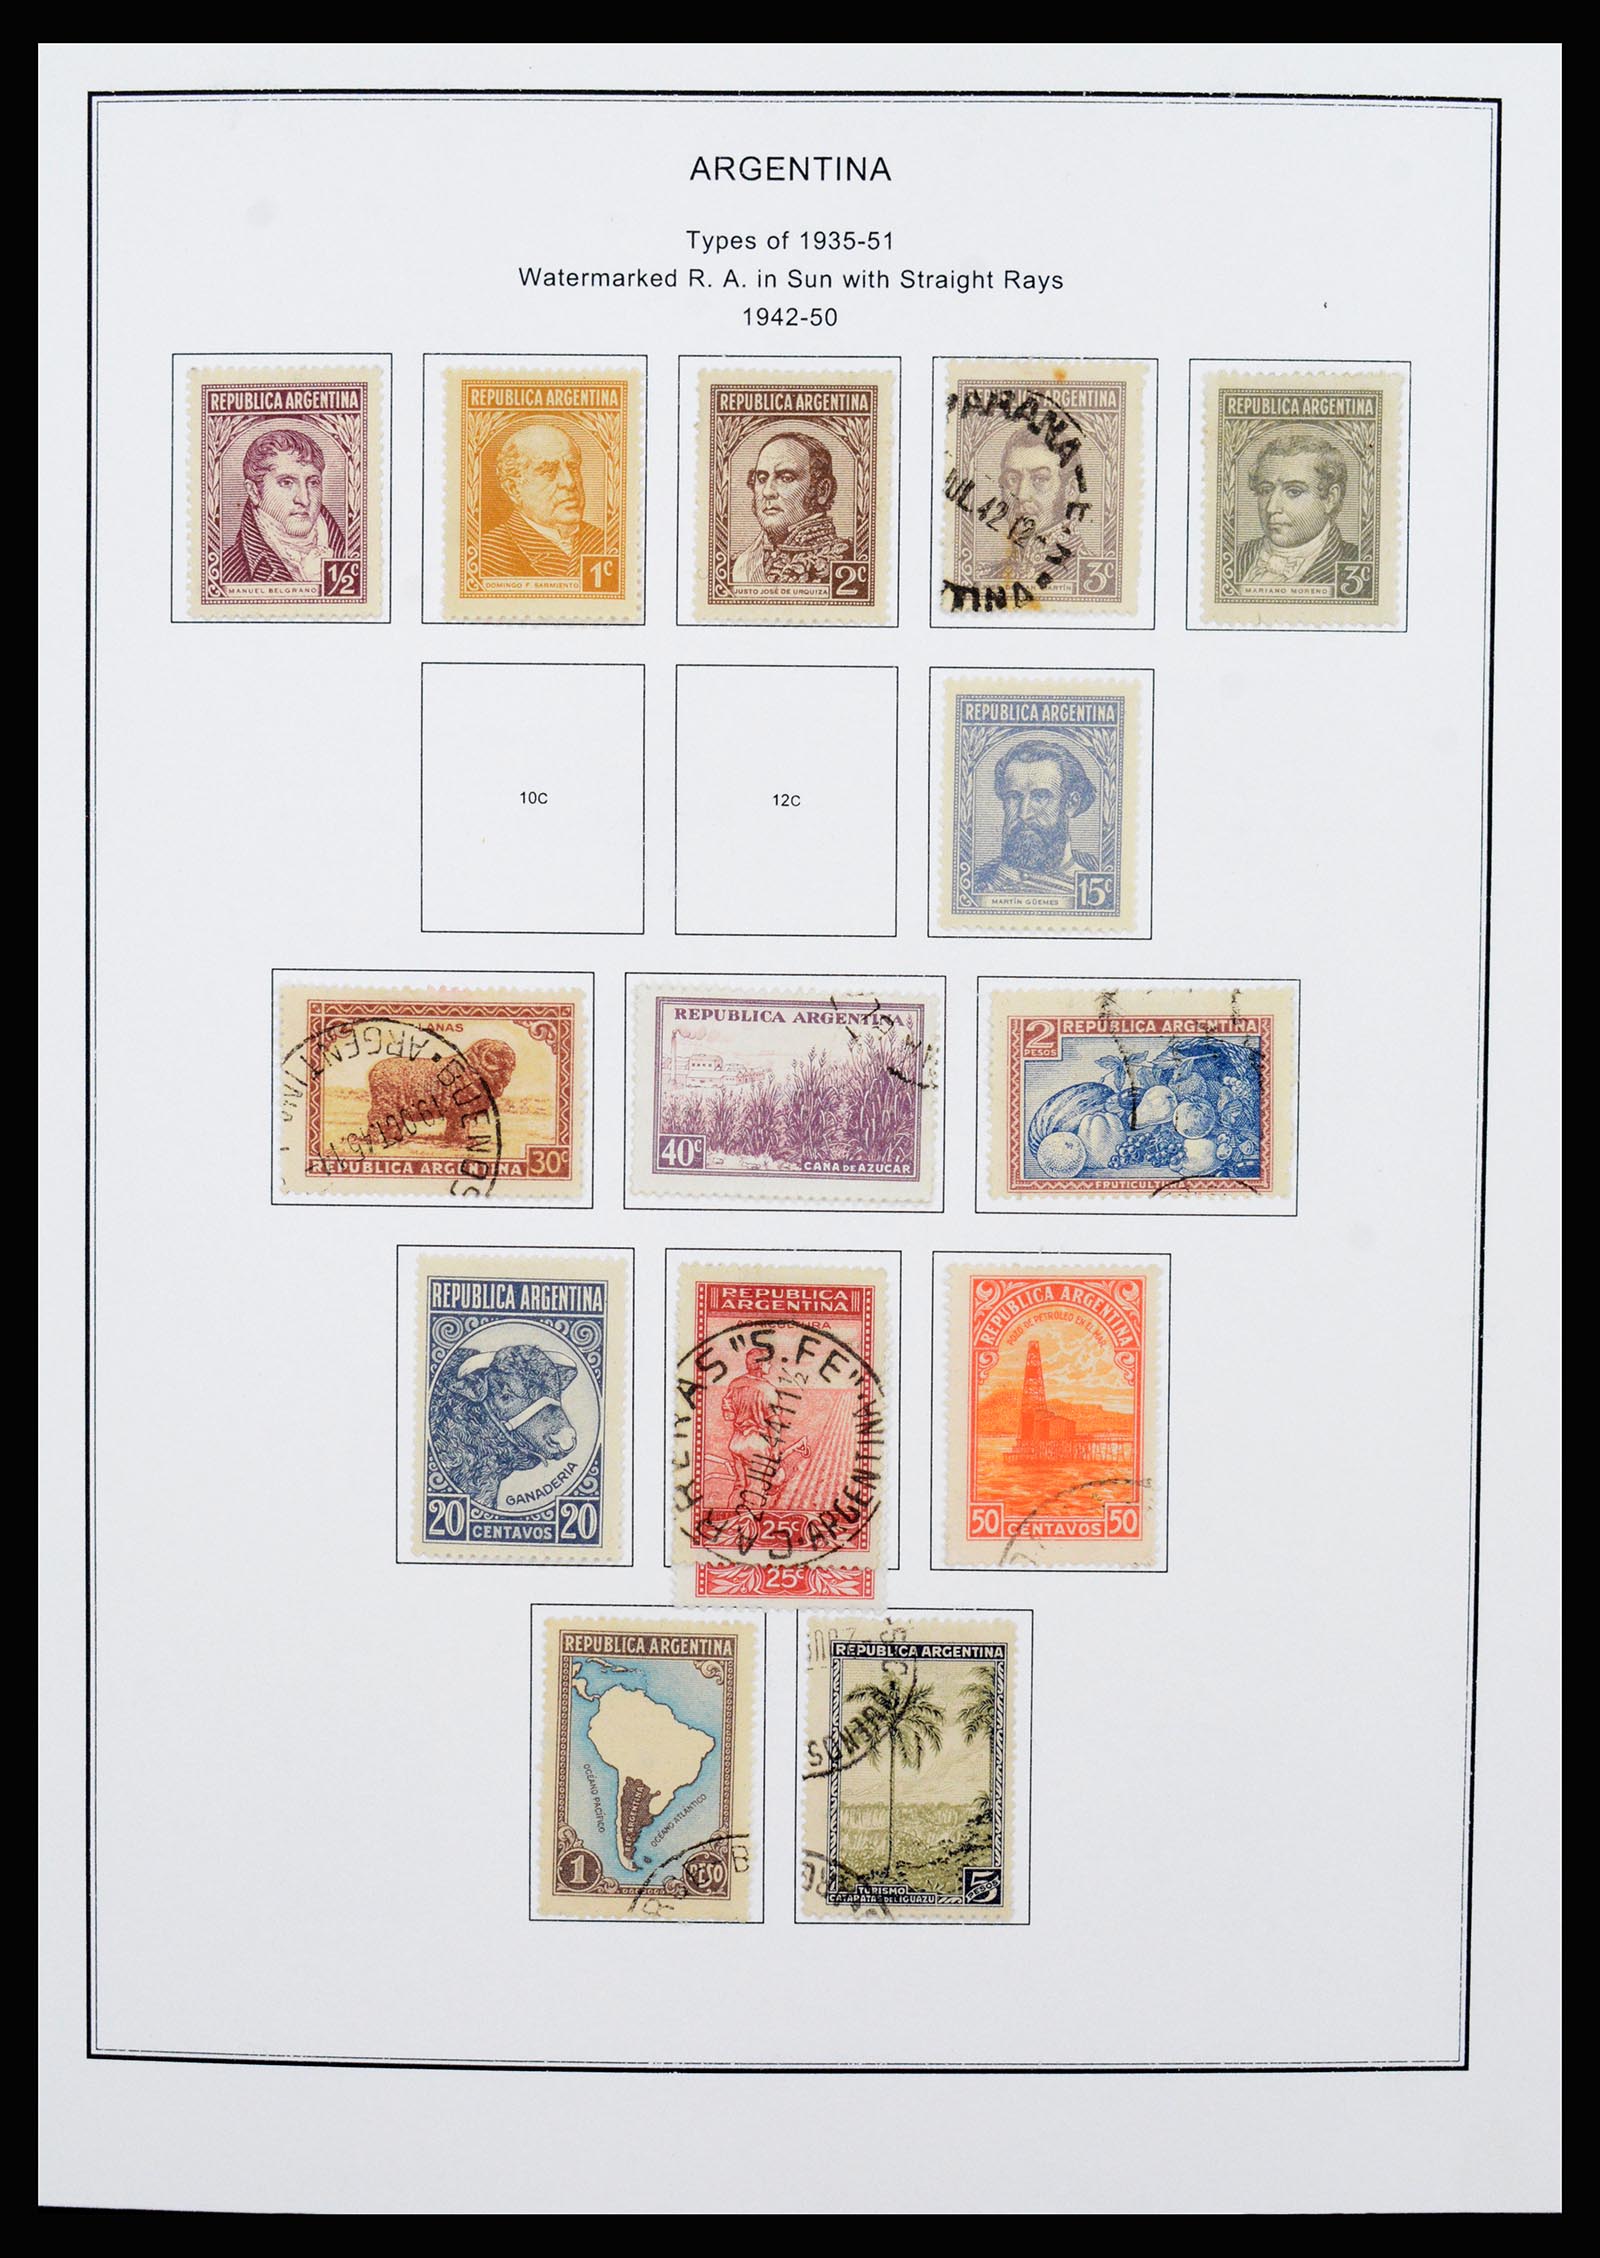 37215 036 - Stamp collection 37215 Argentina 1858-2003.